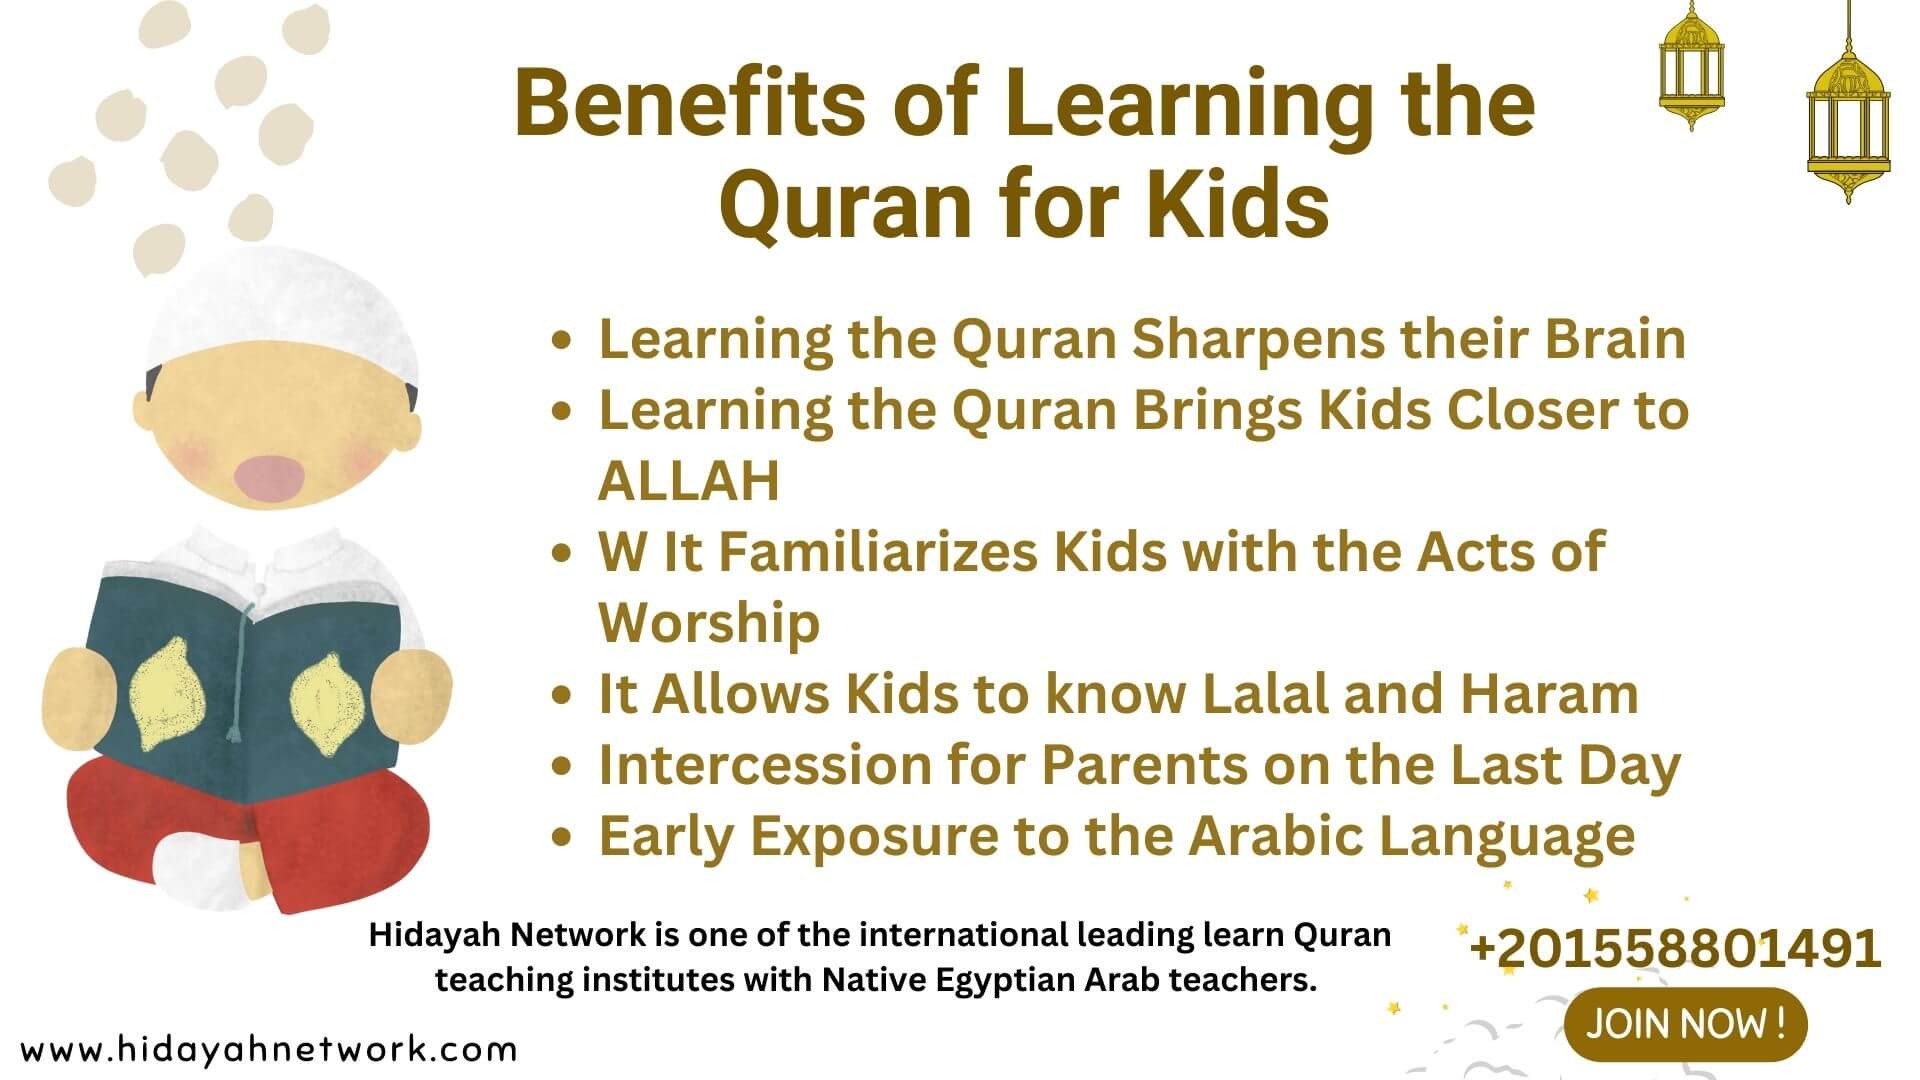 Benefits of Learning the Quran for Kids